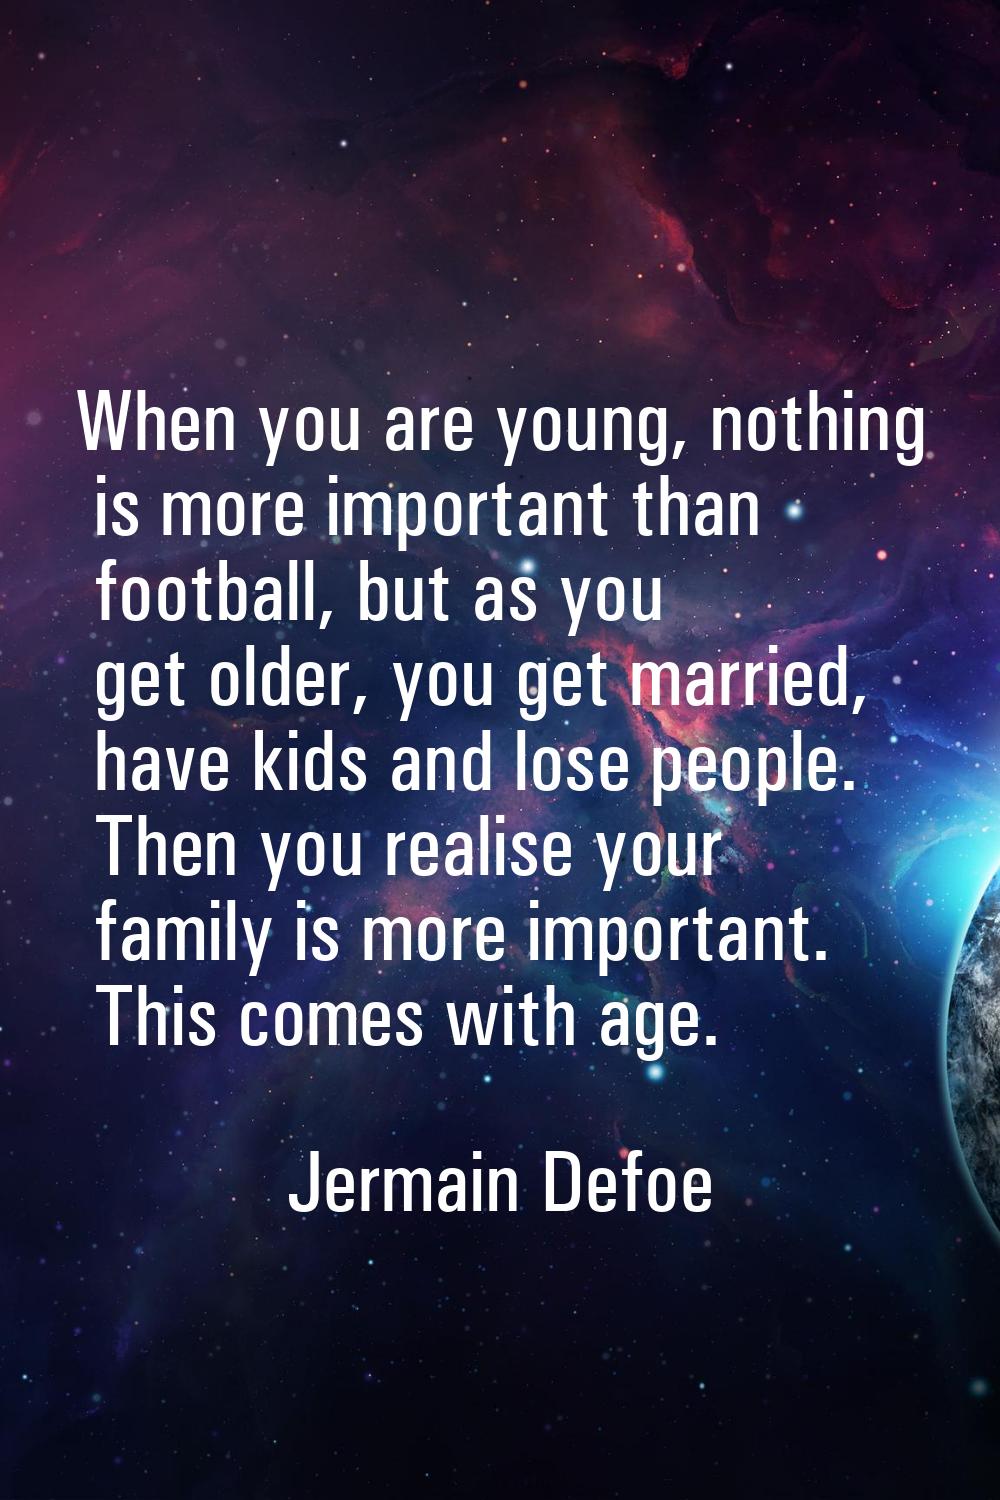 When you are young, nothing is more important than football, but as you get older, you get married,